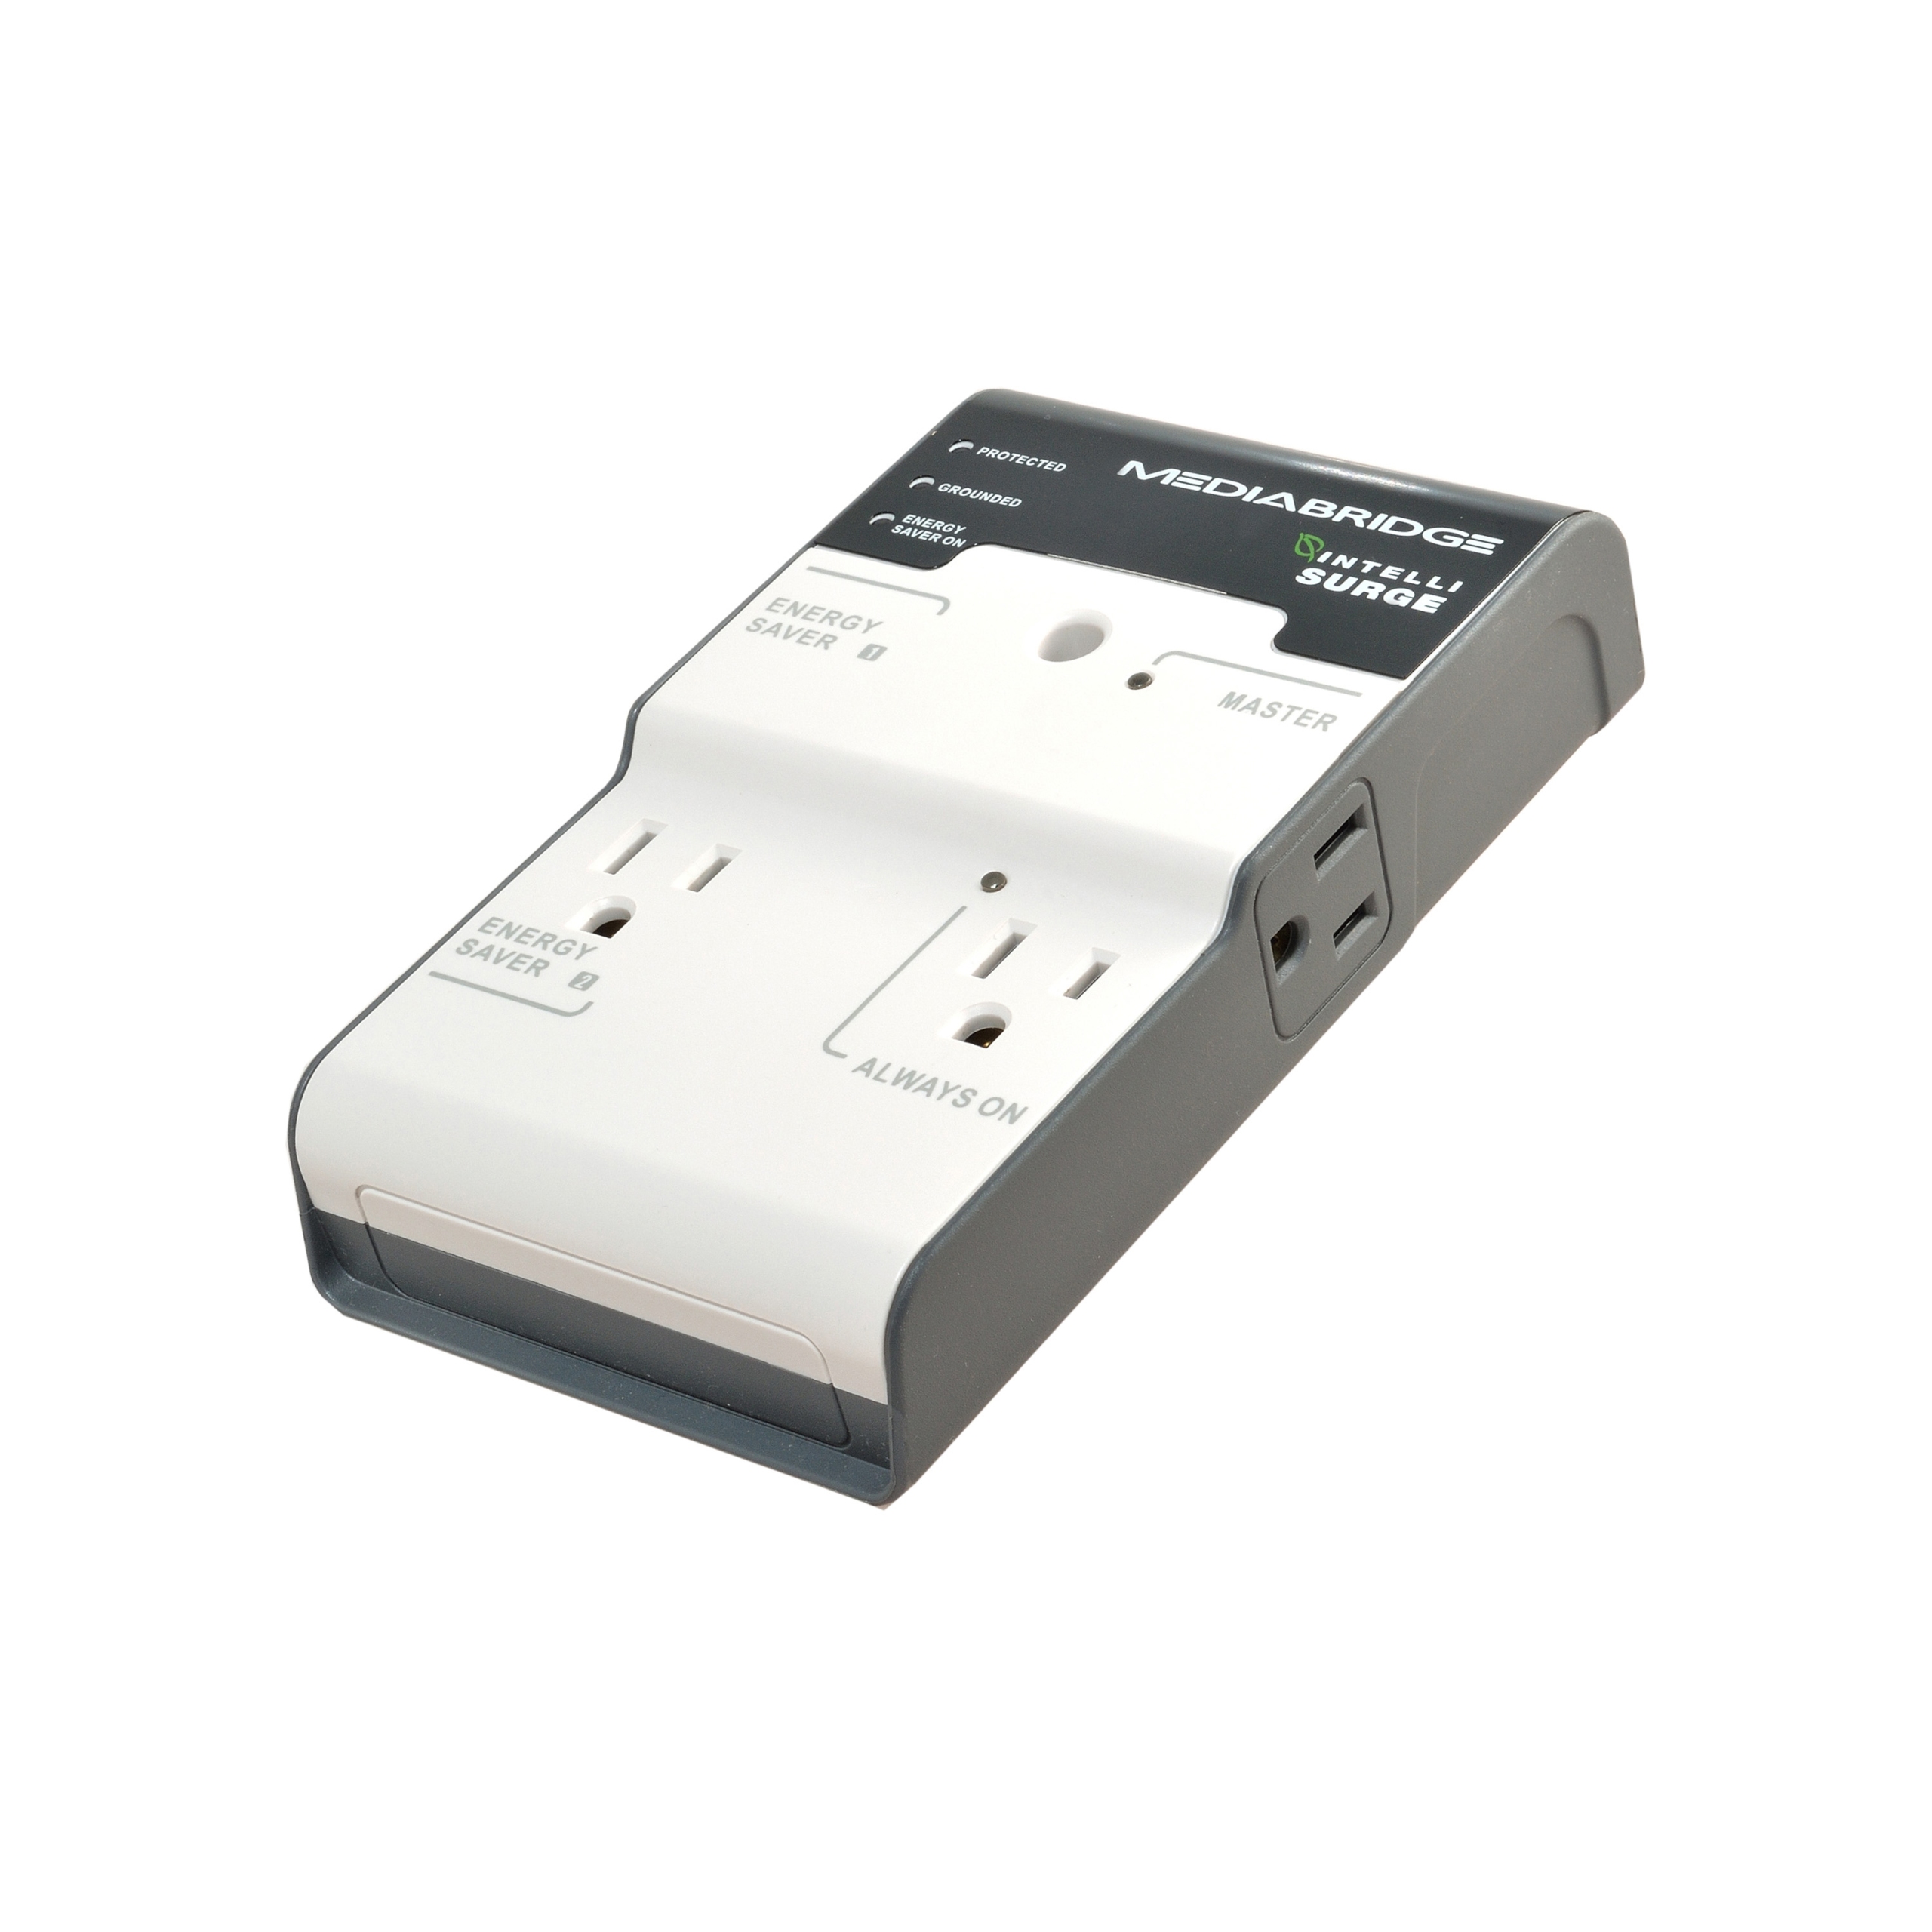 EquiWarm Pro  Wall outlets, Energy efficient technologies